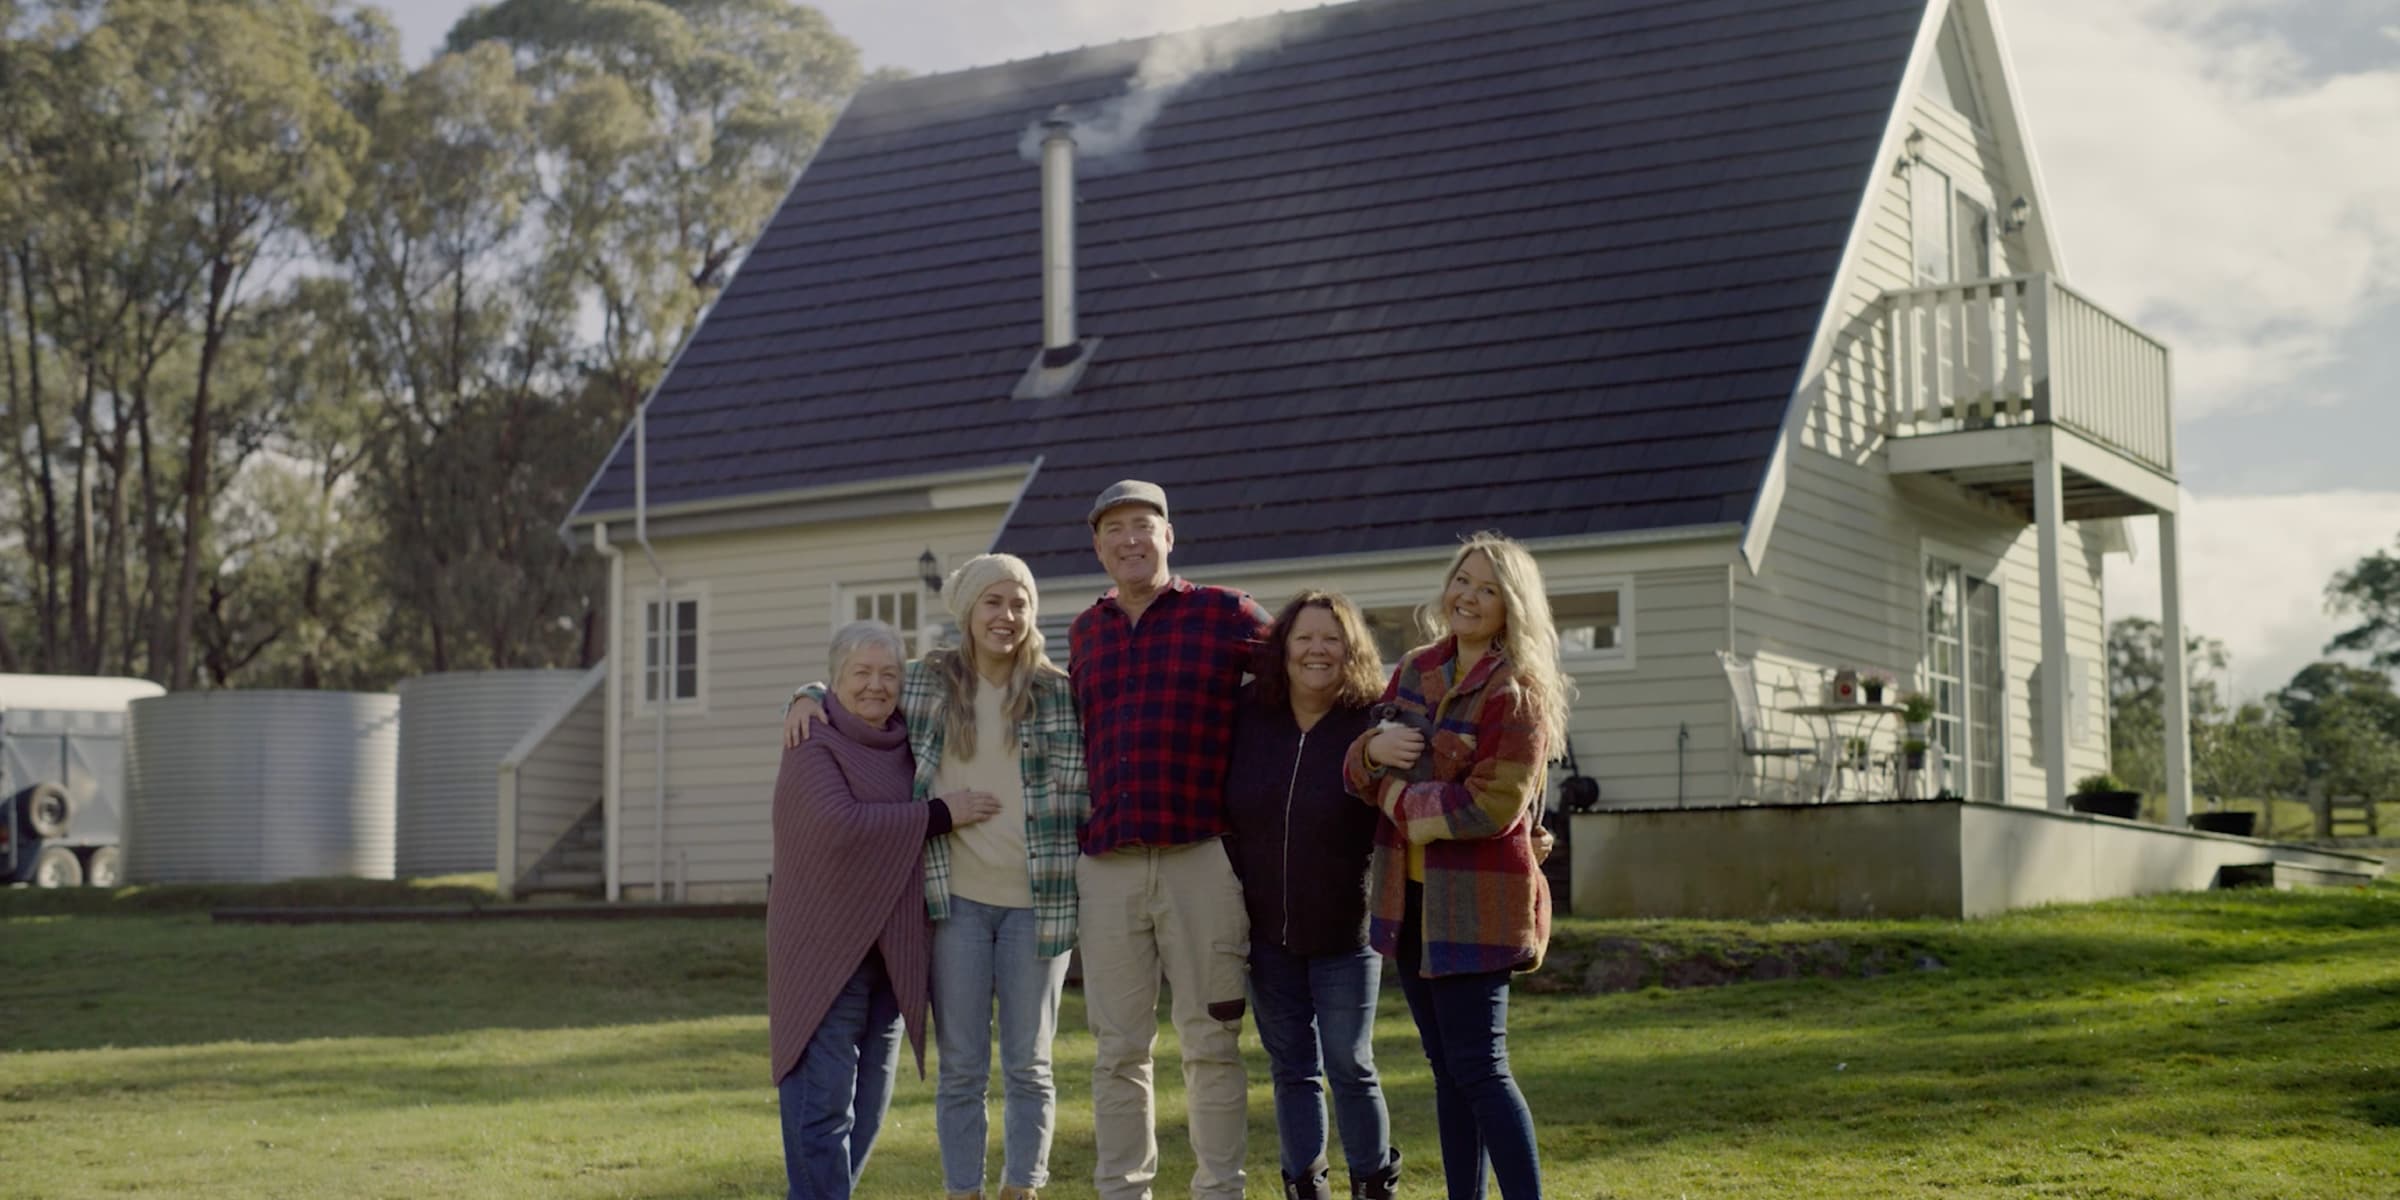 A portrait of the Brooks family, one man & four women, in front of their home